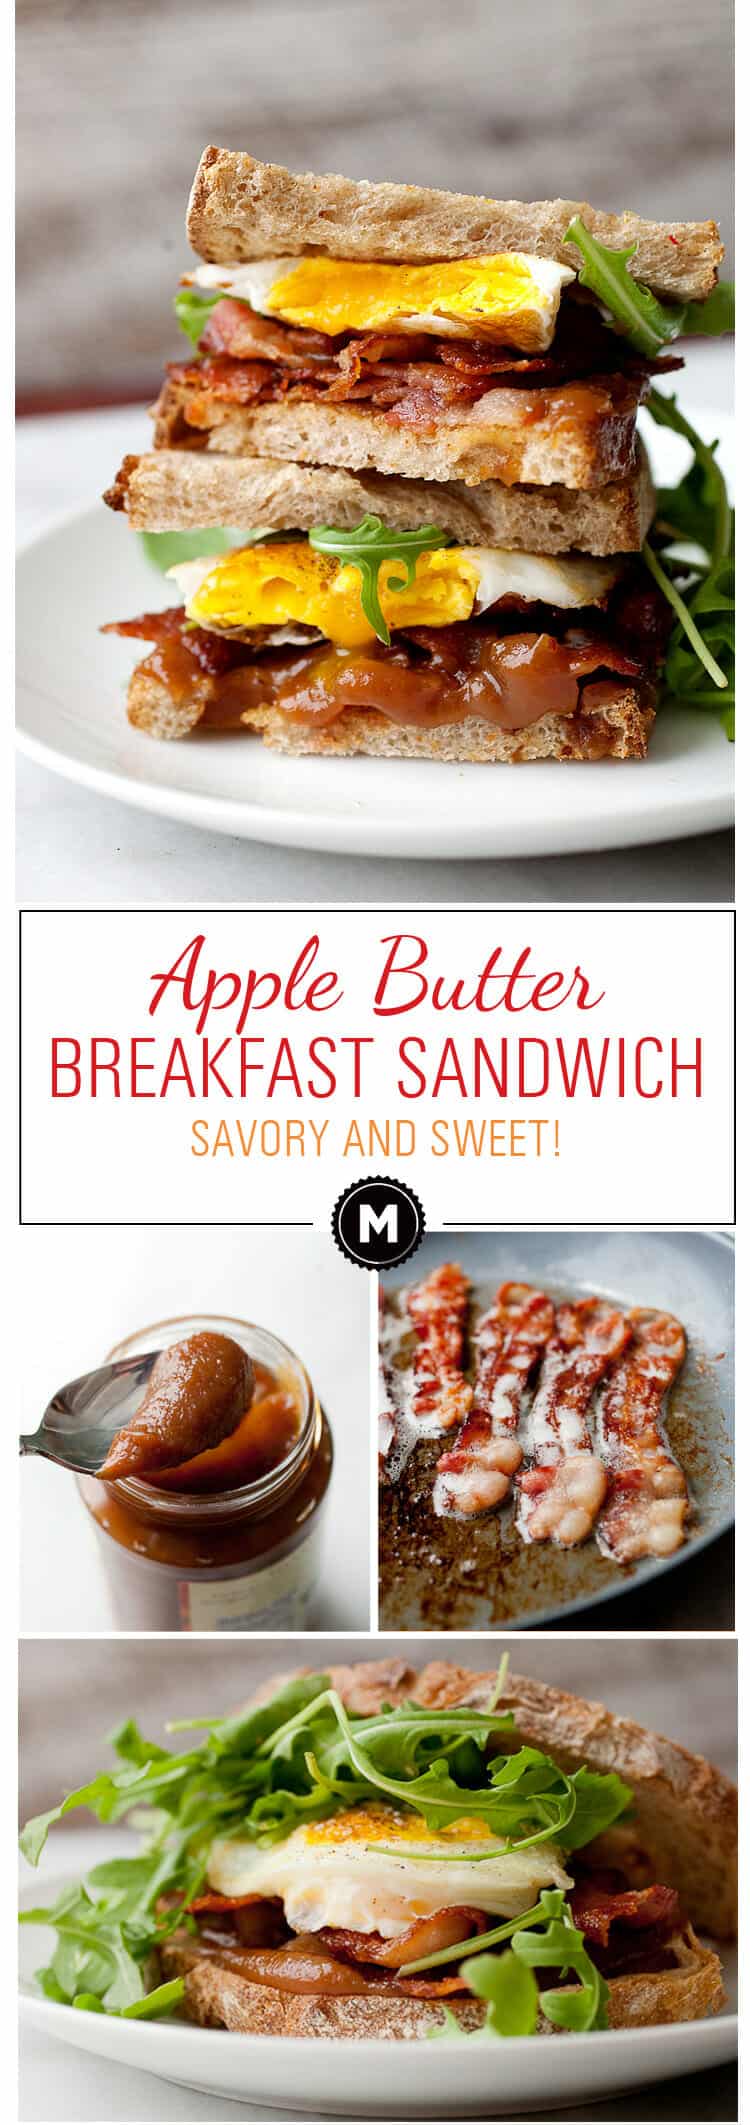 Apple Butter Breakfast Sandwich: A perfect savory and sweet breakfast sandwich that just takes a few minutes to make. You've never had a breakfast sandwich like this! | macheesmo.com